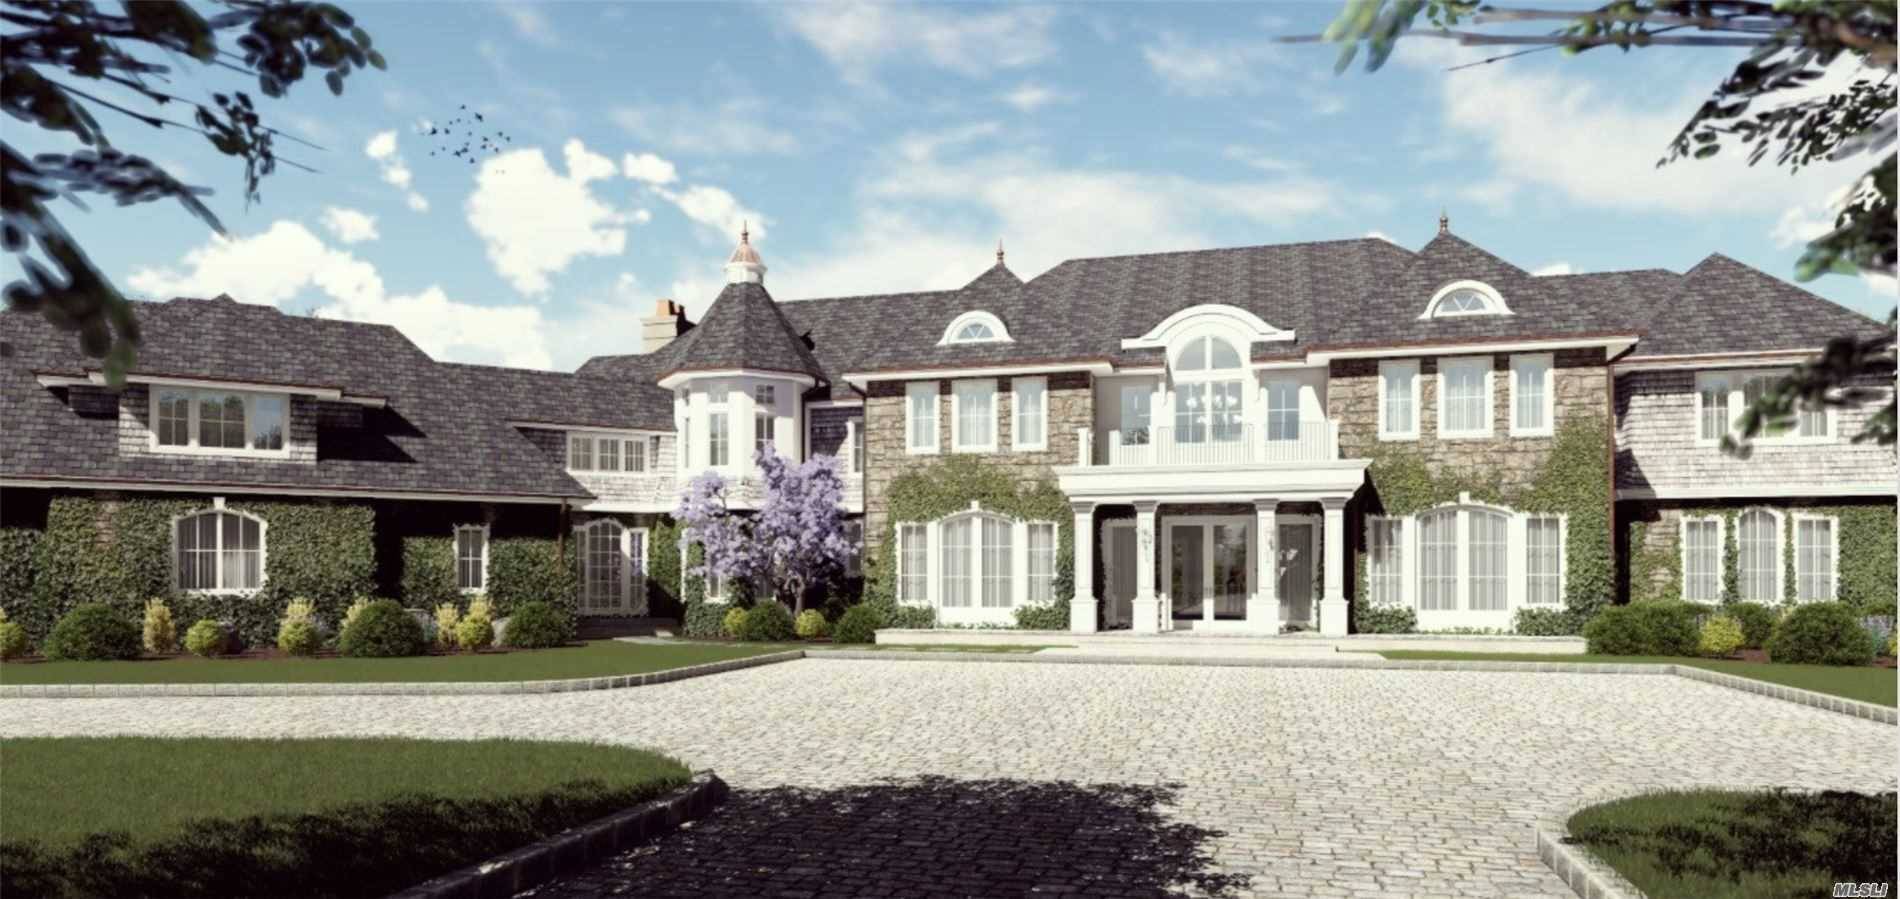 Build to Suit Enjoy the Majestic Property Setting on 3.